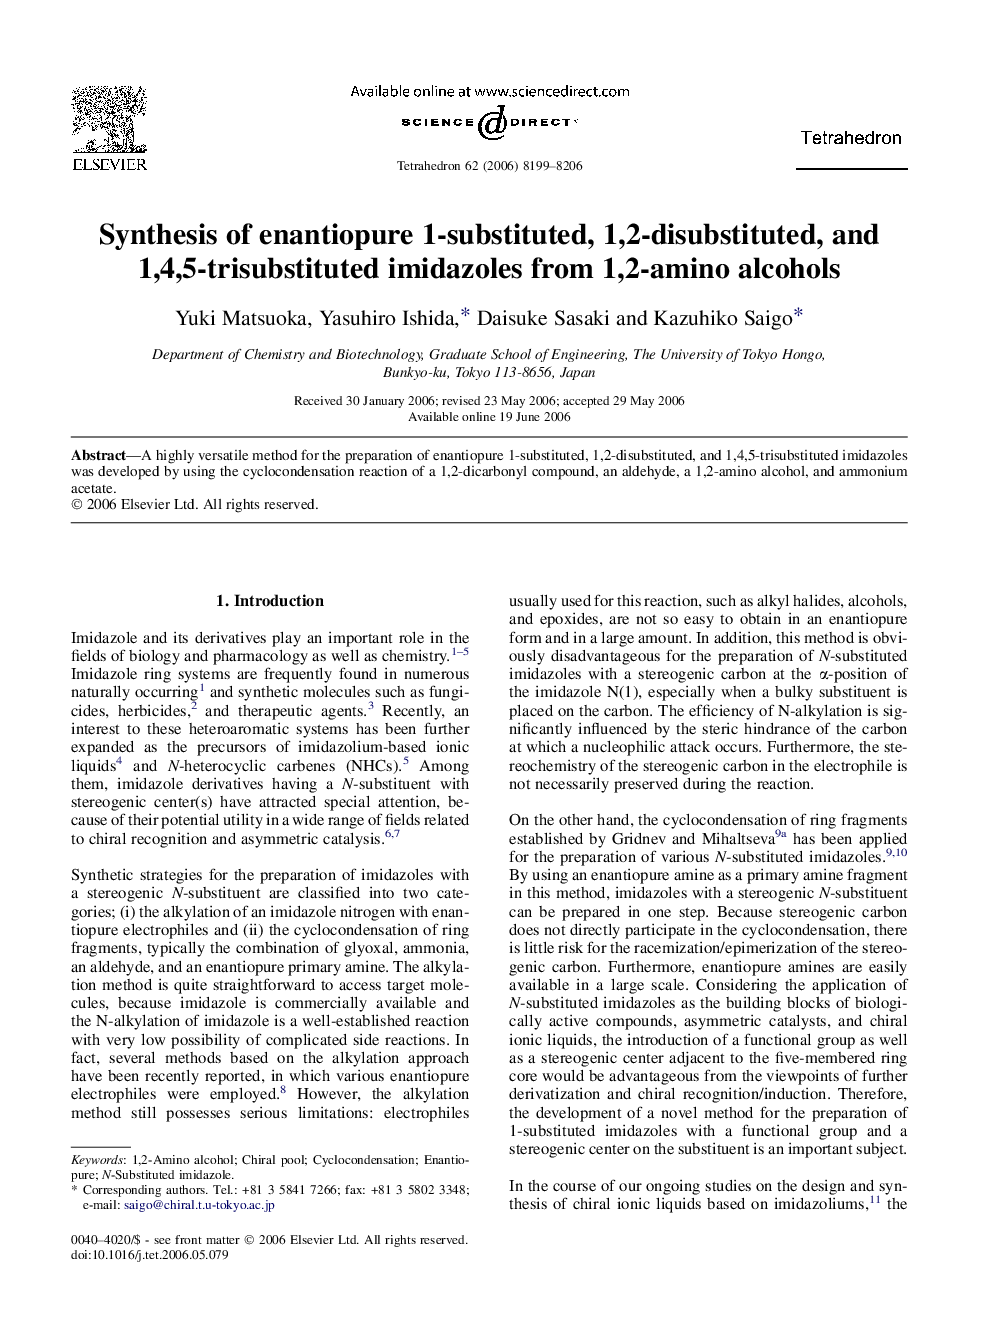 Synthesis of enantiopure 1-substituted, 1,2-disubstituted, and 1,4,5-trisubstituted imidazoles from 1,2-amino alcohols